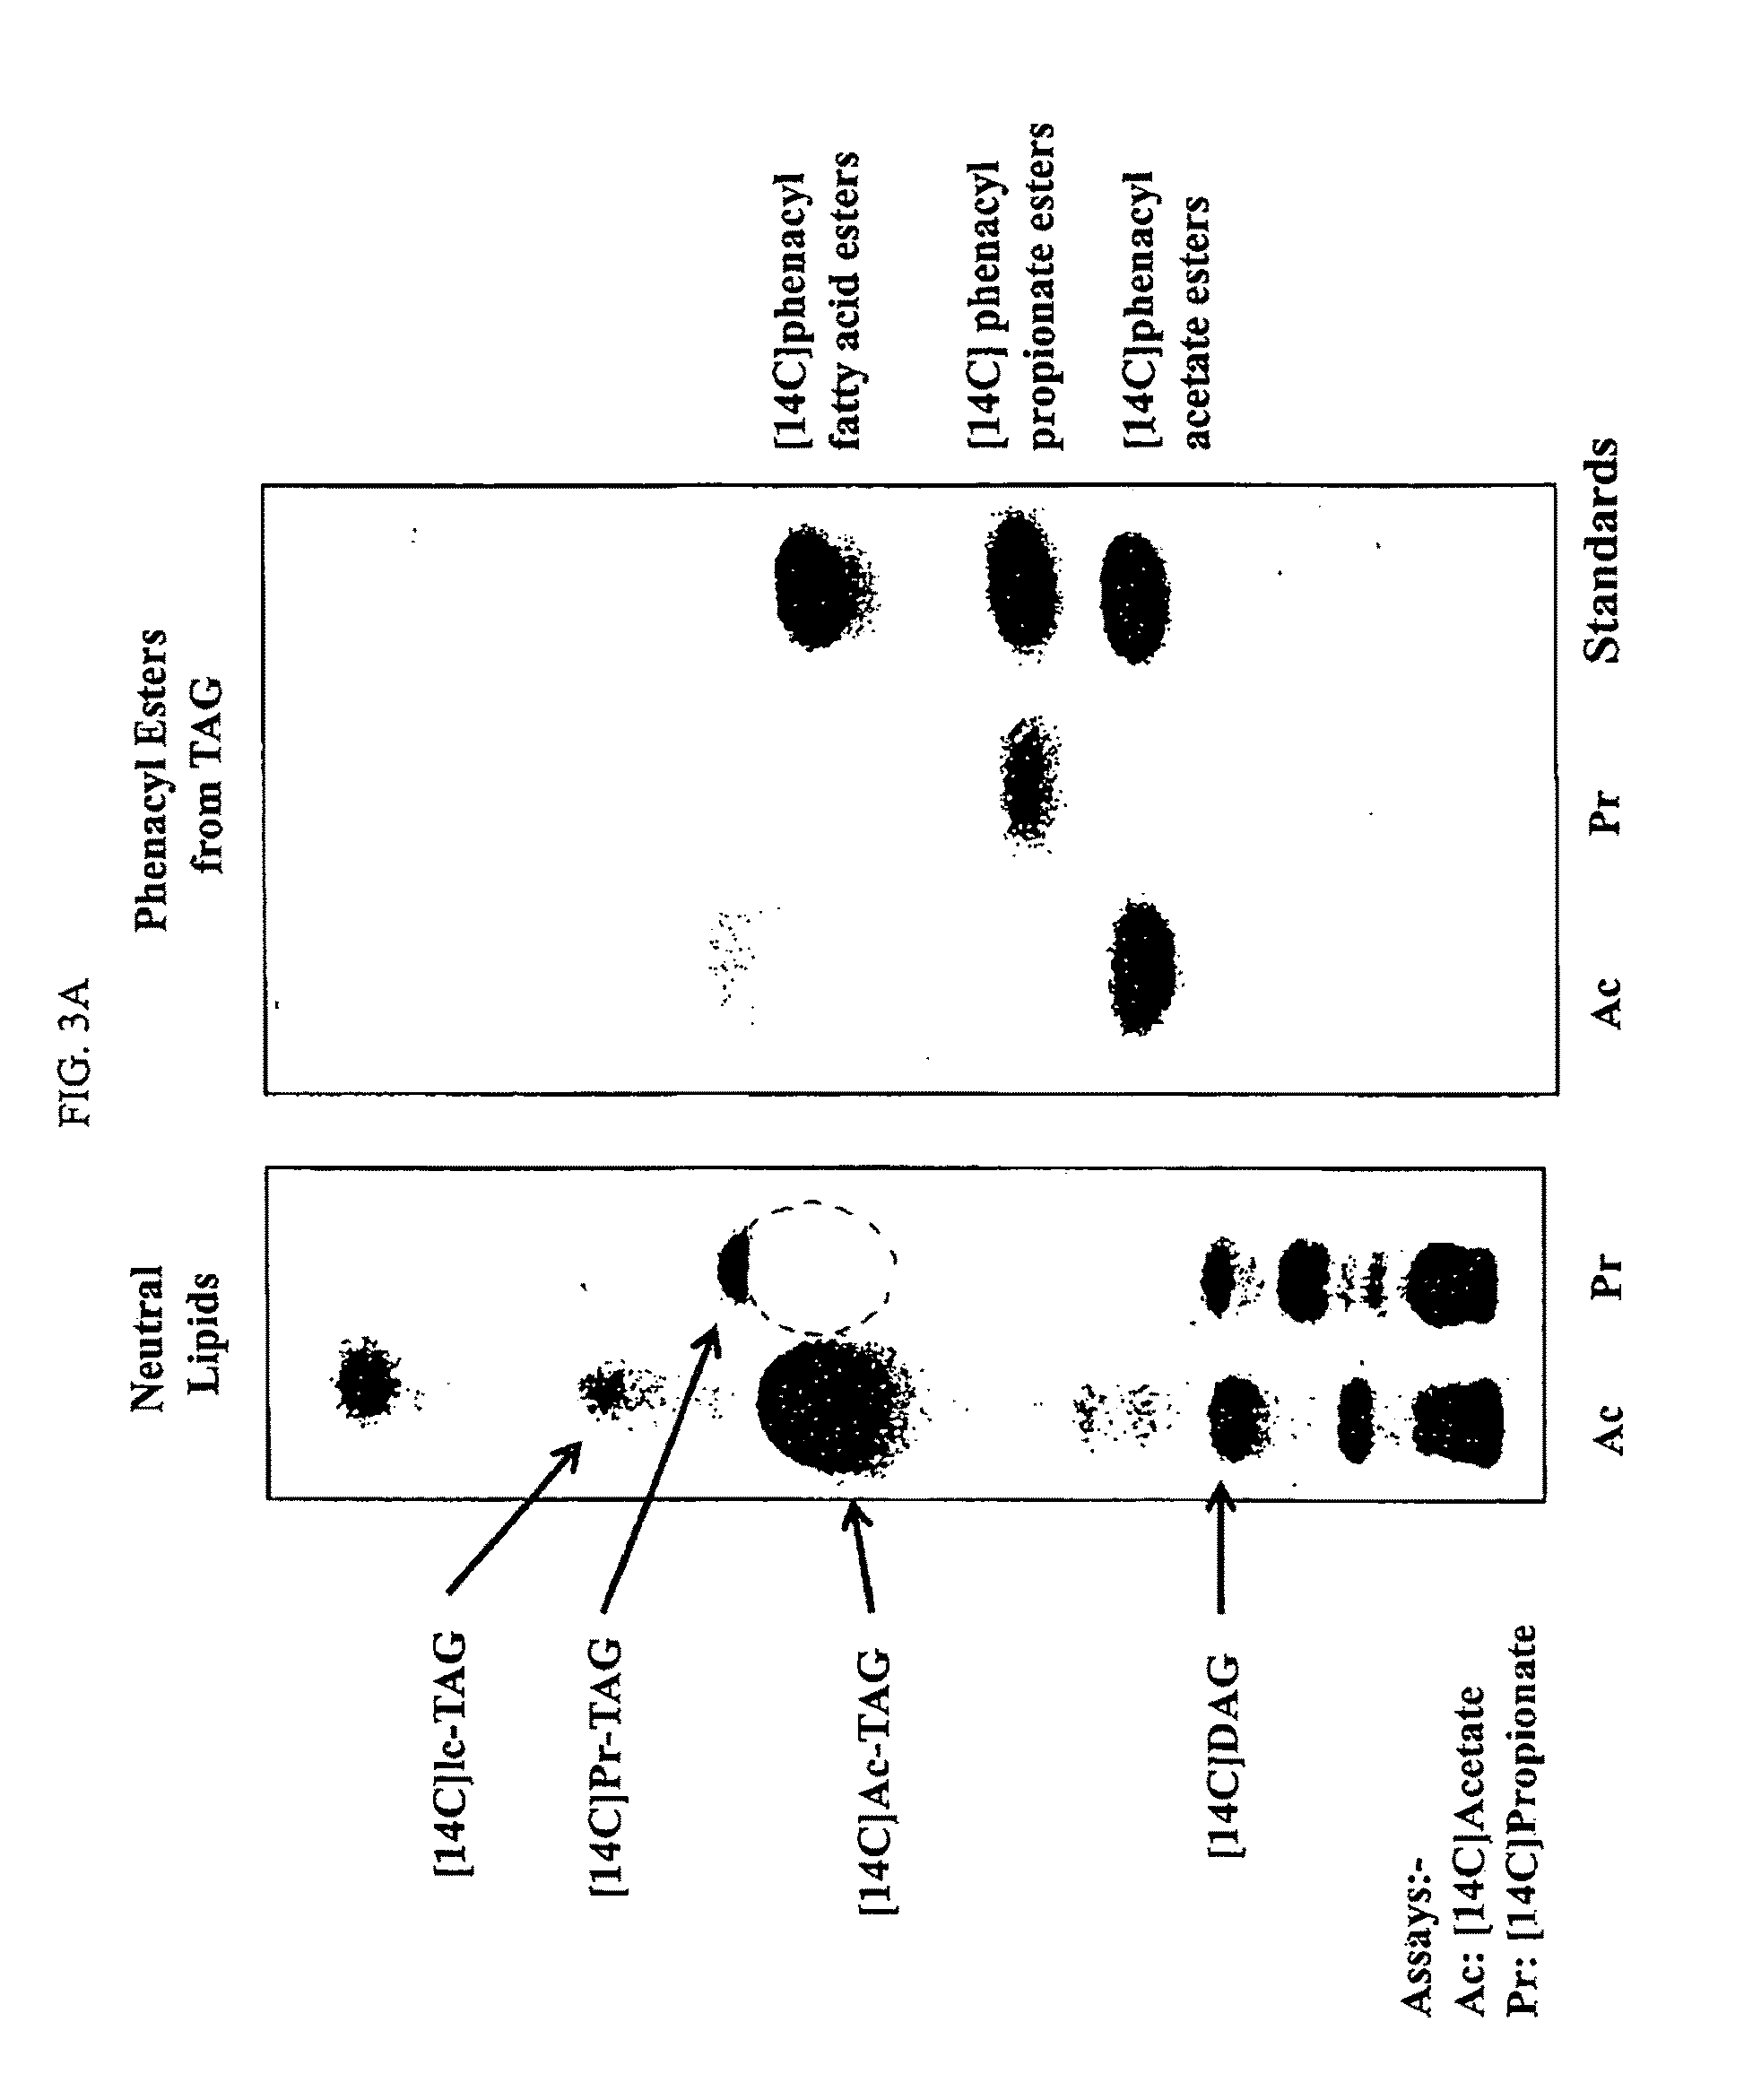 Method to produce acetyldiacylglycerols (ac-TAGs) by expression of an acetyltransferase gene isolated from <i>Euonymus alatus </i>(burning bush)